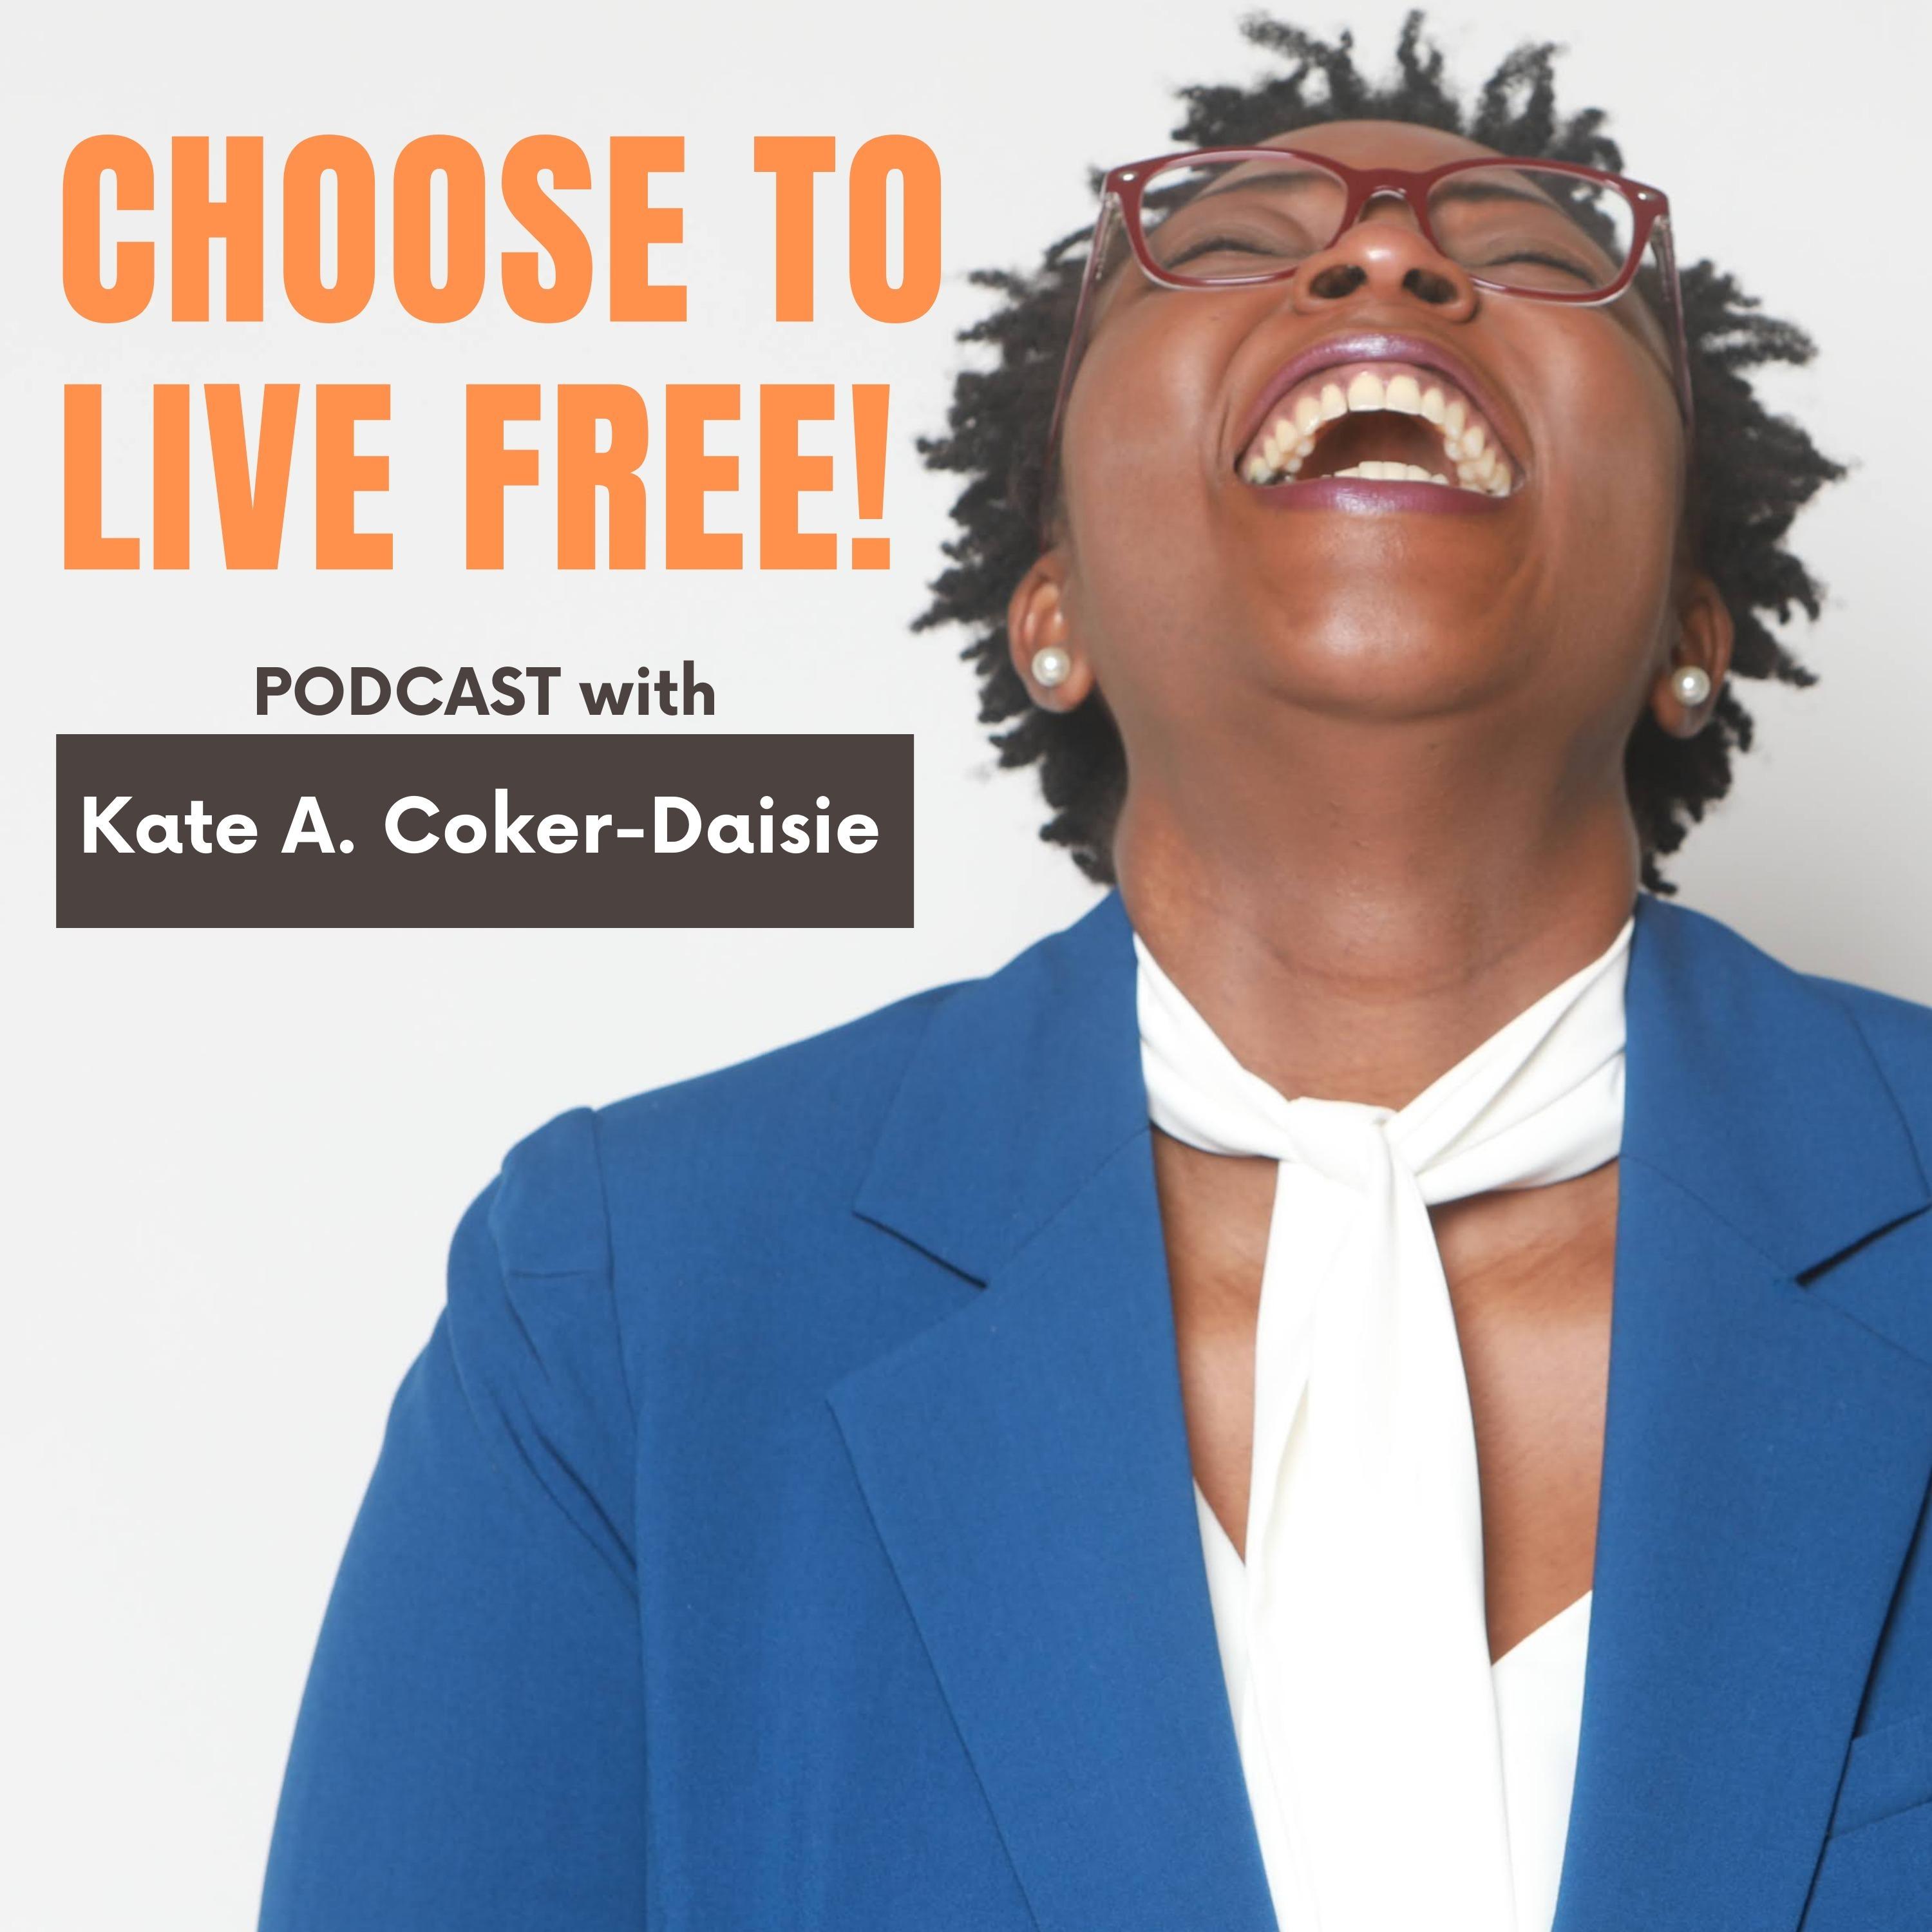 Choose to Live FREE! with Kate A. Coker-Daisie